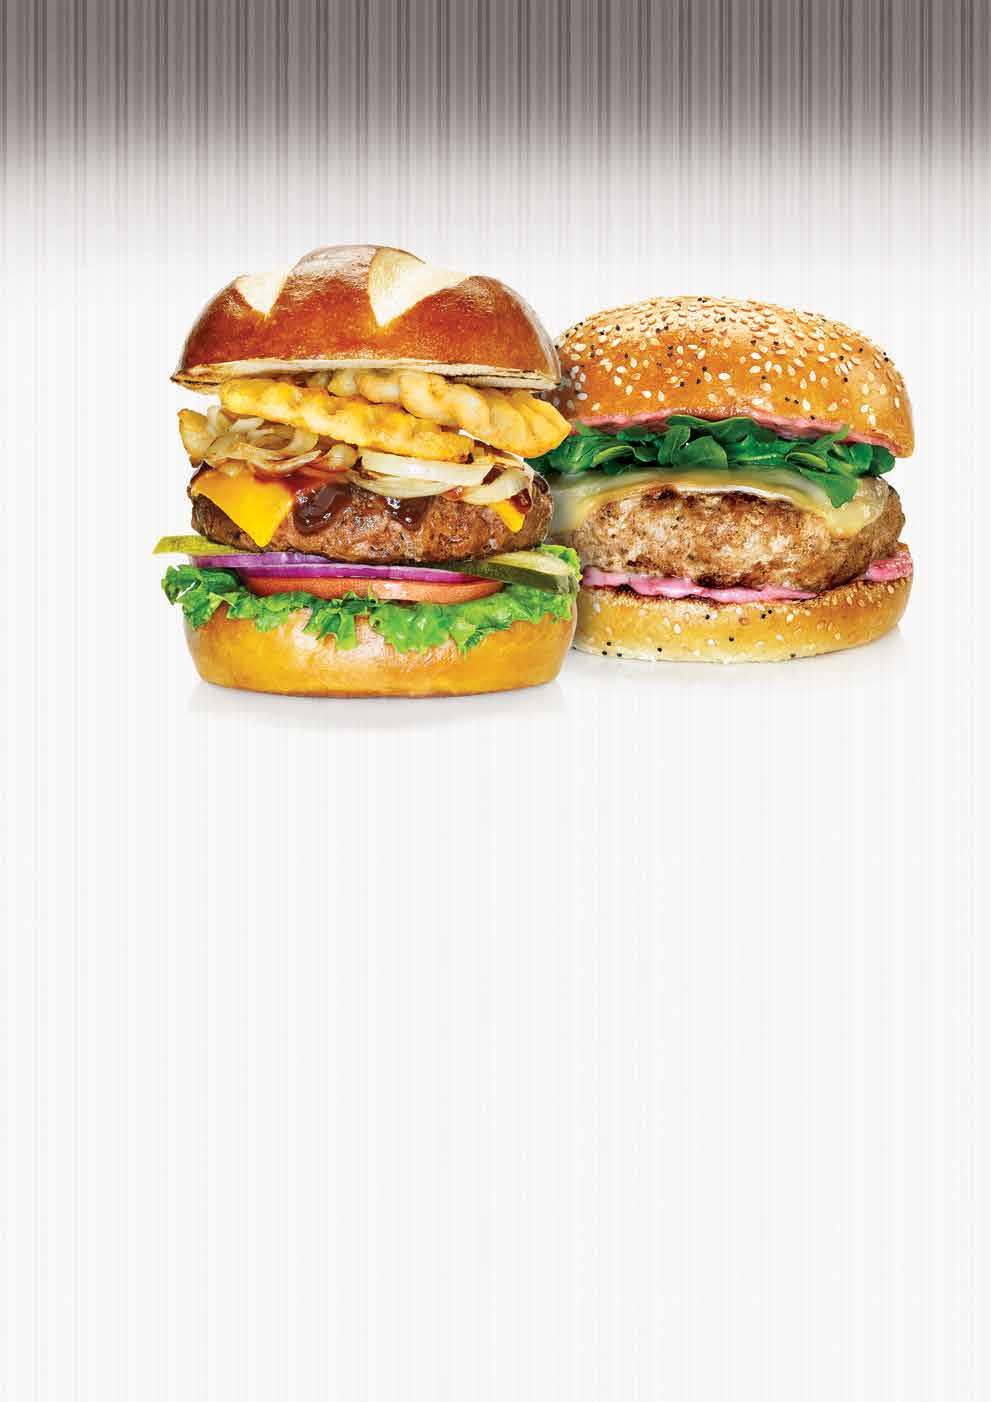 HND-CRFTED BURGERS Our signature burger patties are hand-crafted and then cooked to perfection on our hot skillets to seal in the amazing flavour.